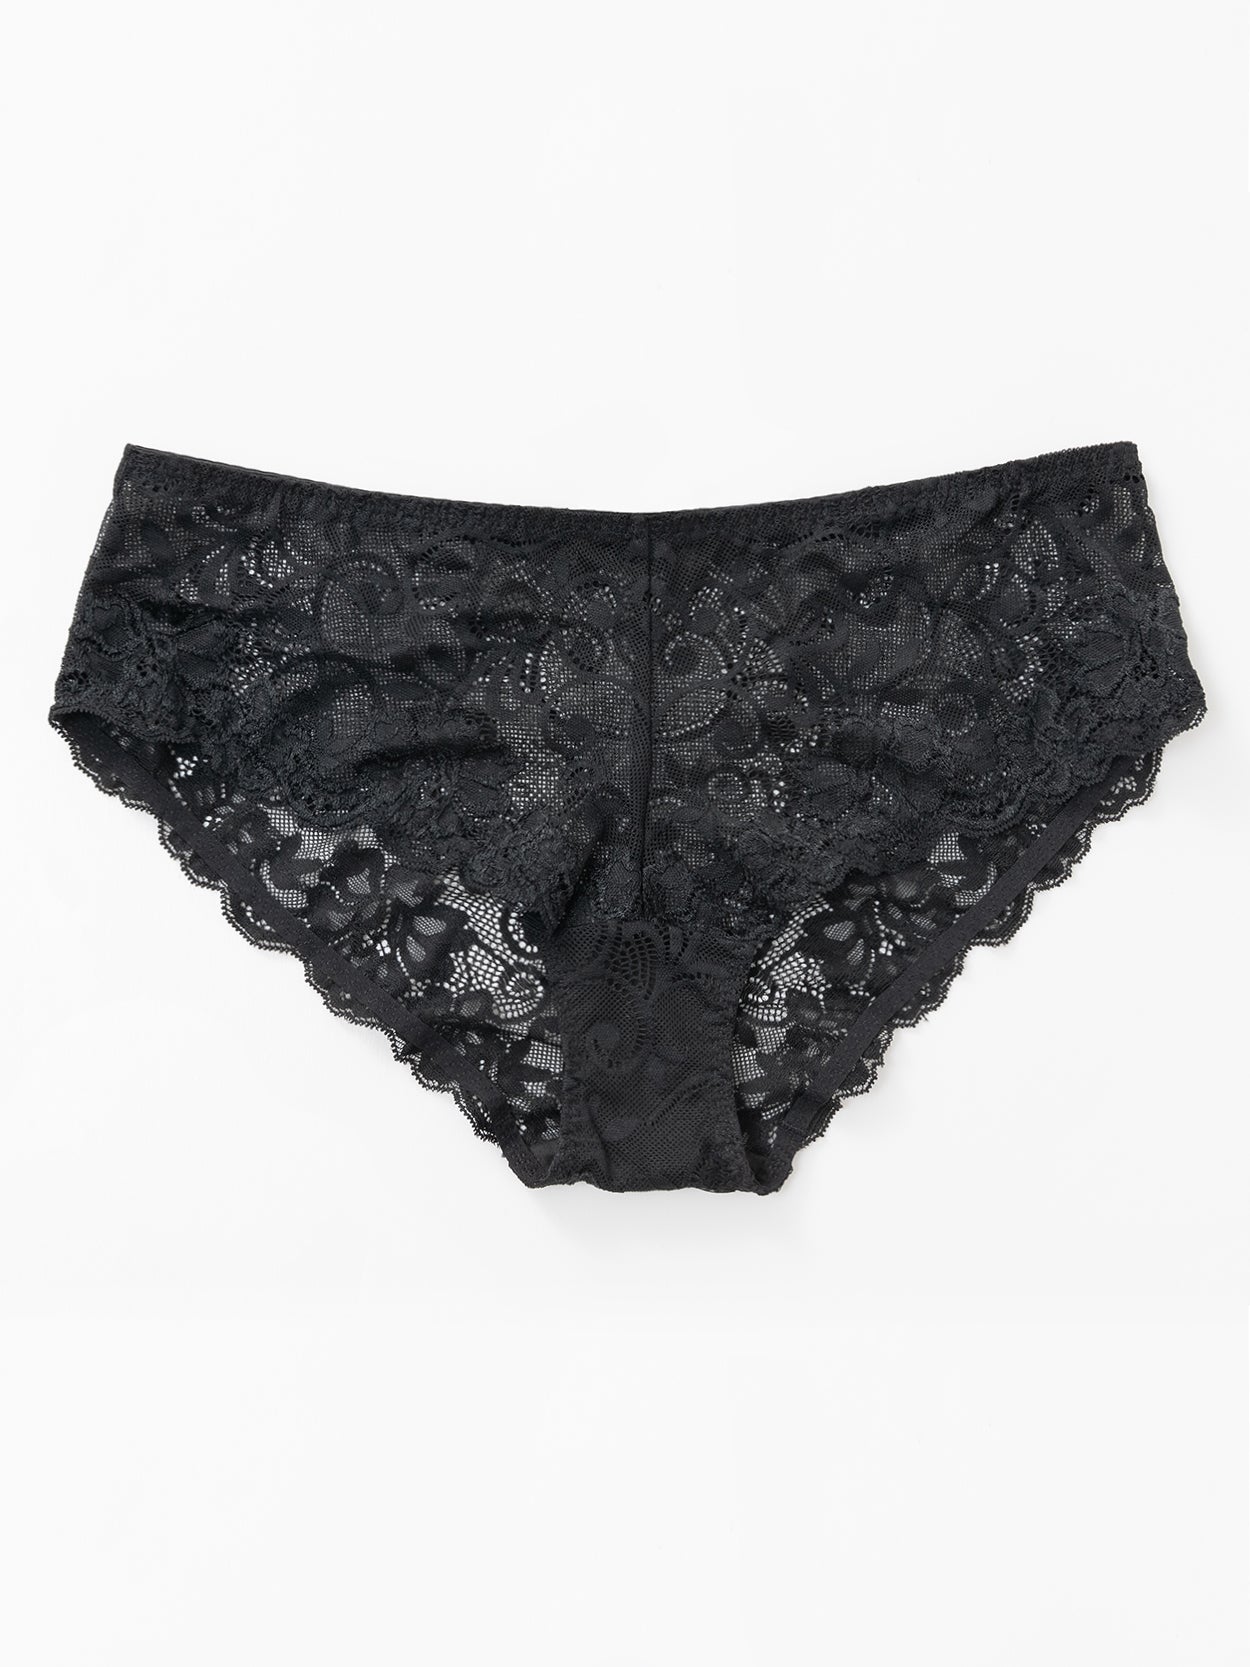 Women's Sexy Lace Panties, Bikini Cheeky Underwear Hipster Panty All Lacy  Low Rise Full Coverage